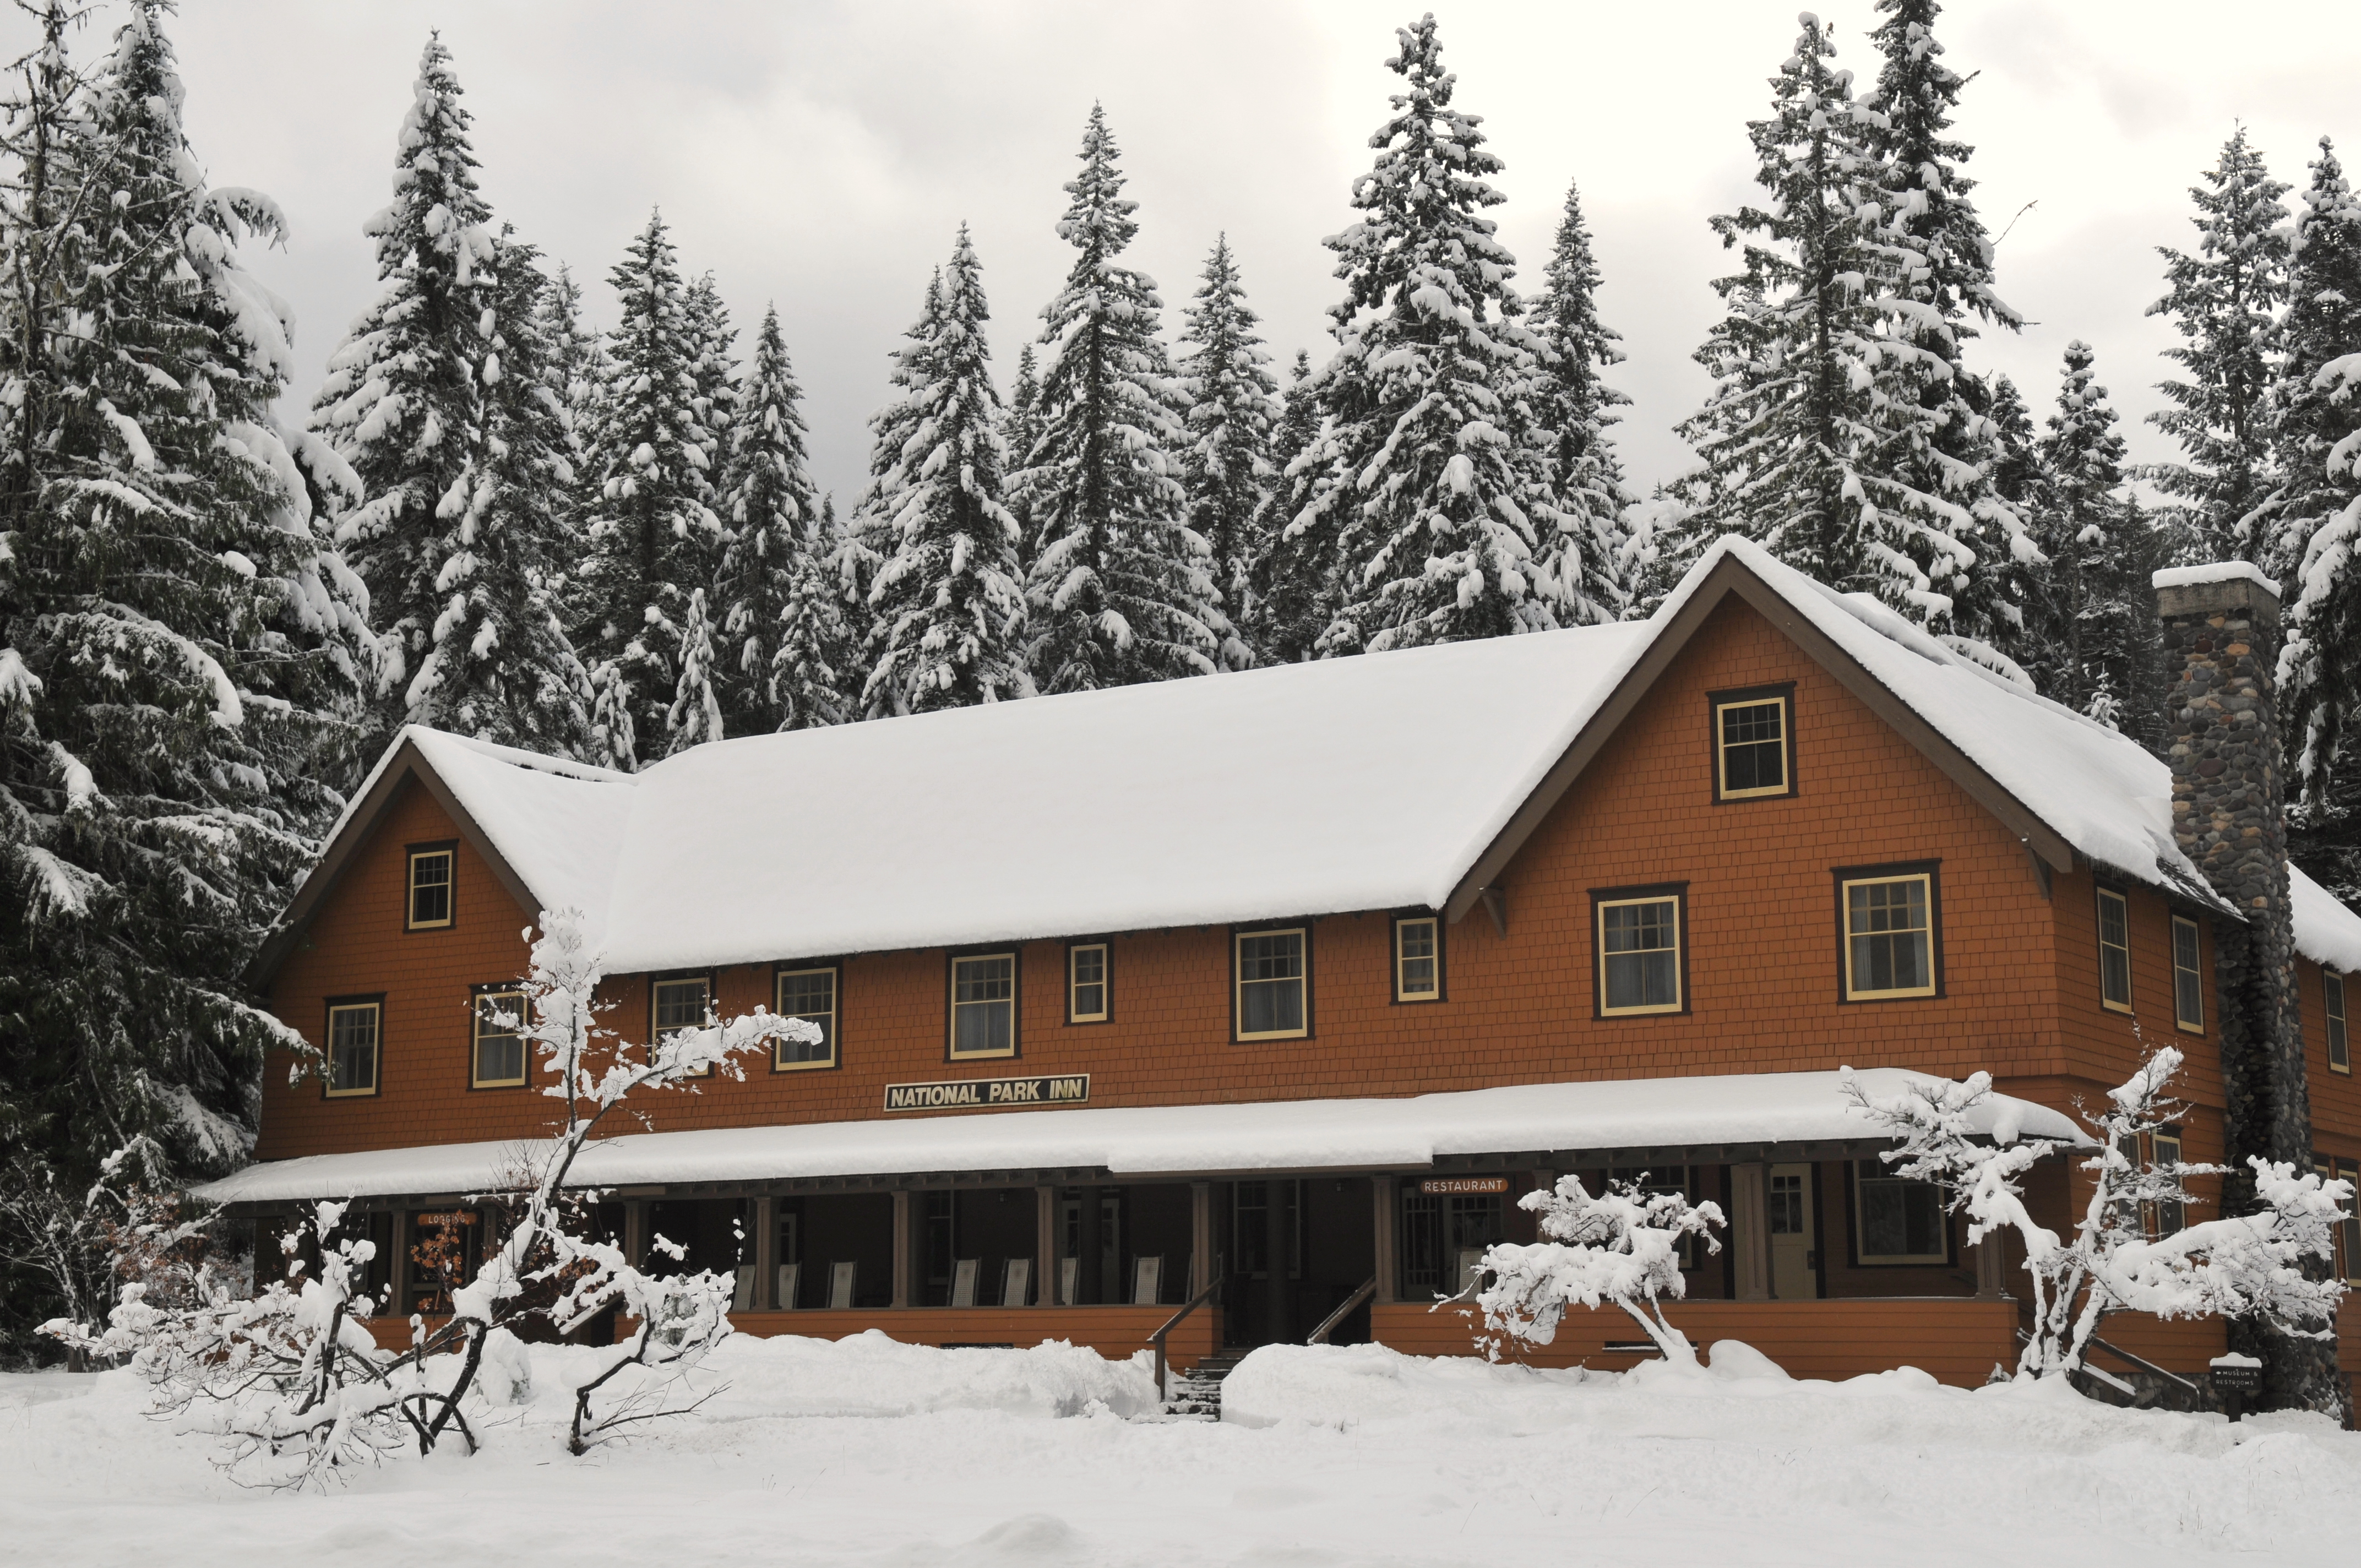 The historic National Park Inn covered in a foot of snow.